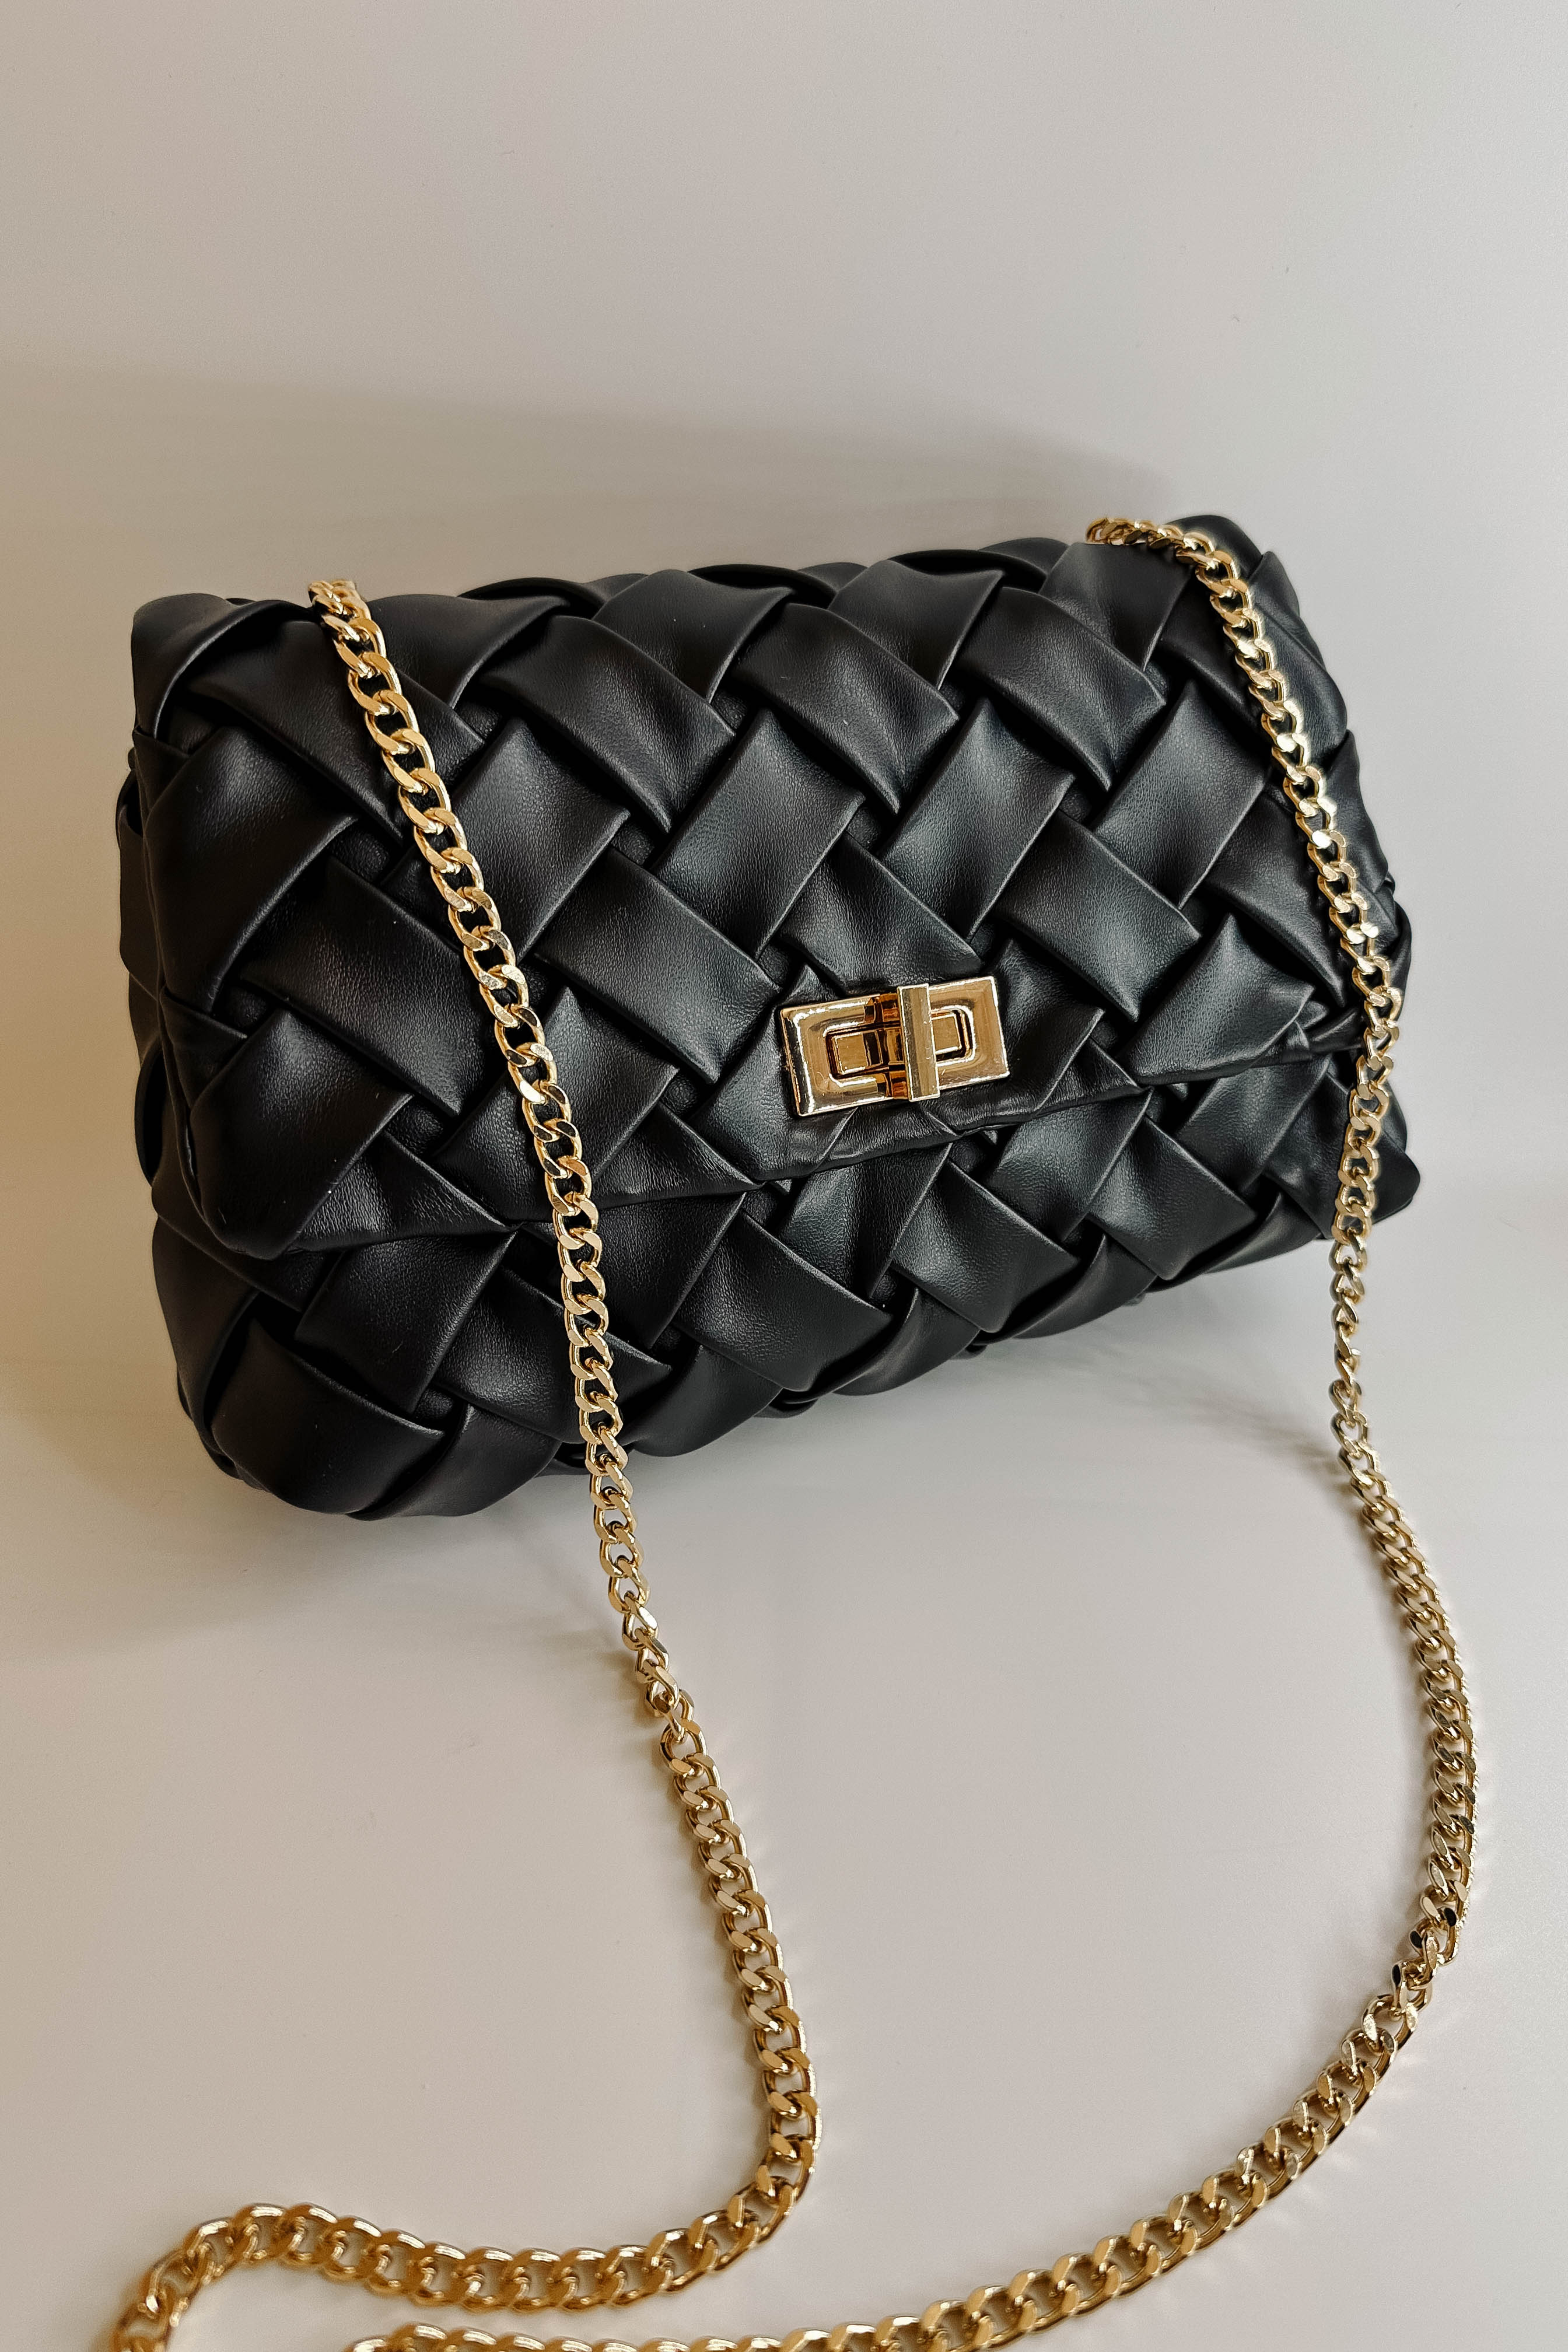 Front view of the Carrie Black Leather Woven Purse which features black woven leather fabric, gold button closure and gold chain link strap.